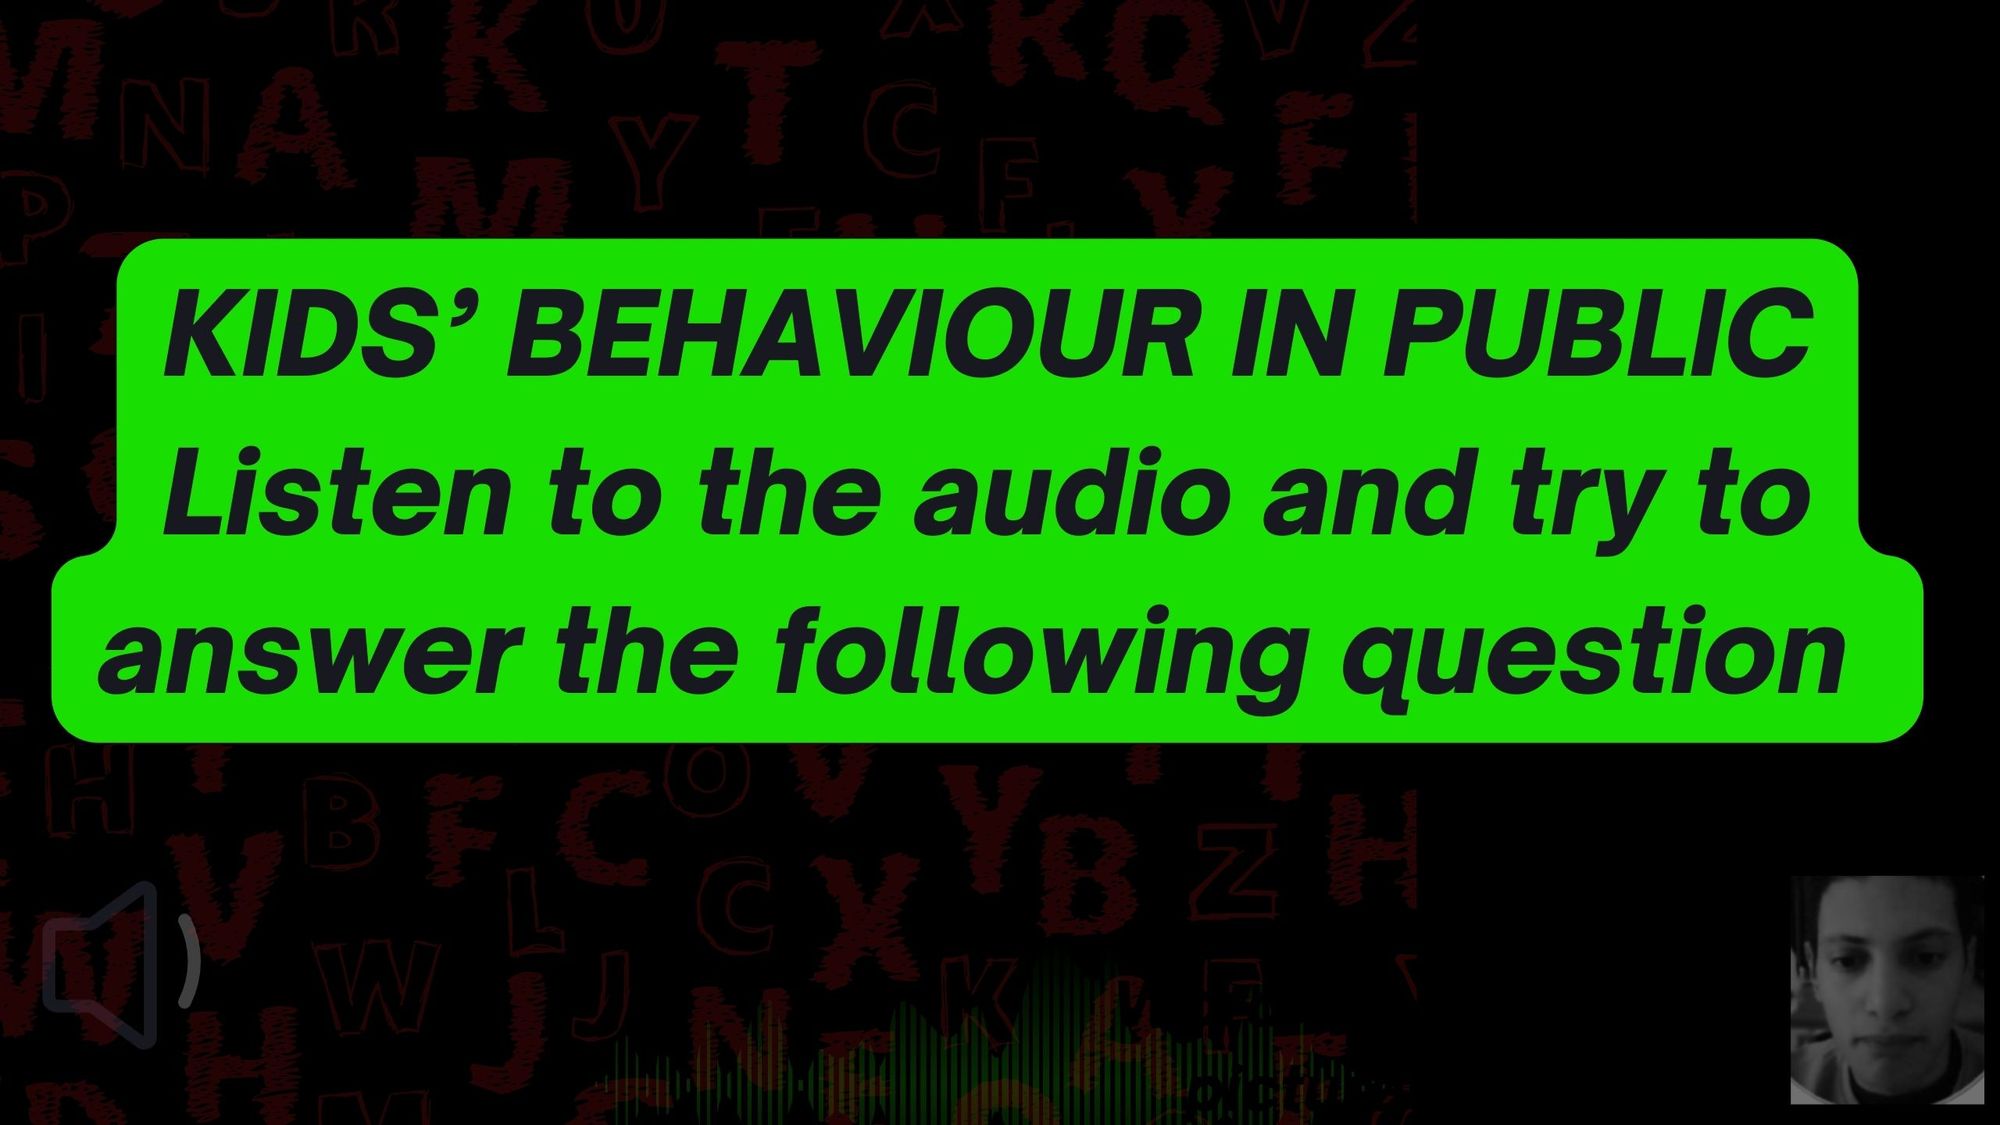 KIDS’ BEHAVIOUR IN PUBLIC Listen to the audio and try to answer the following question